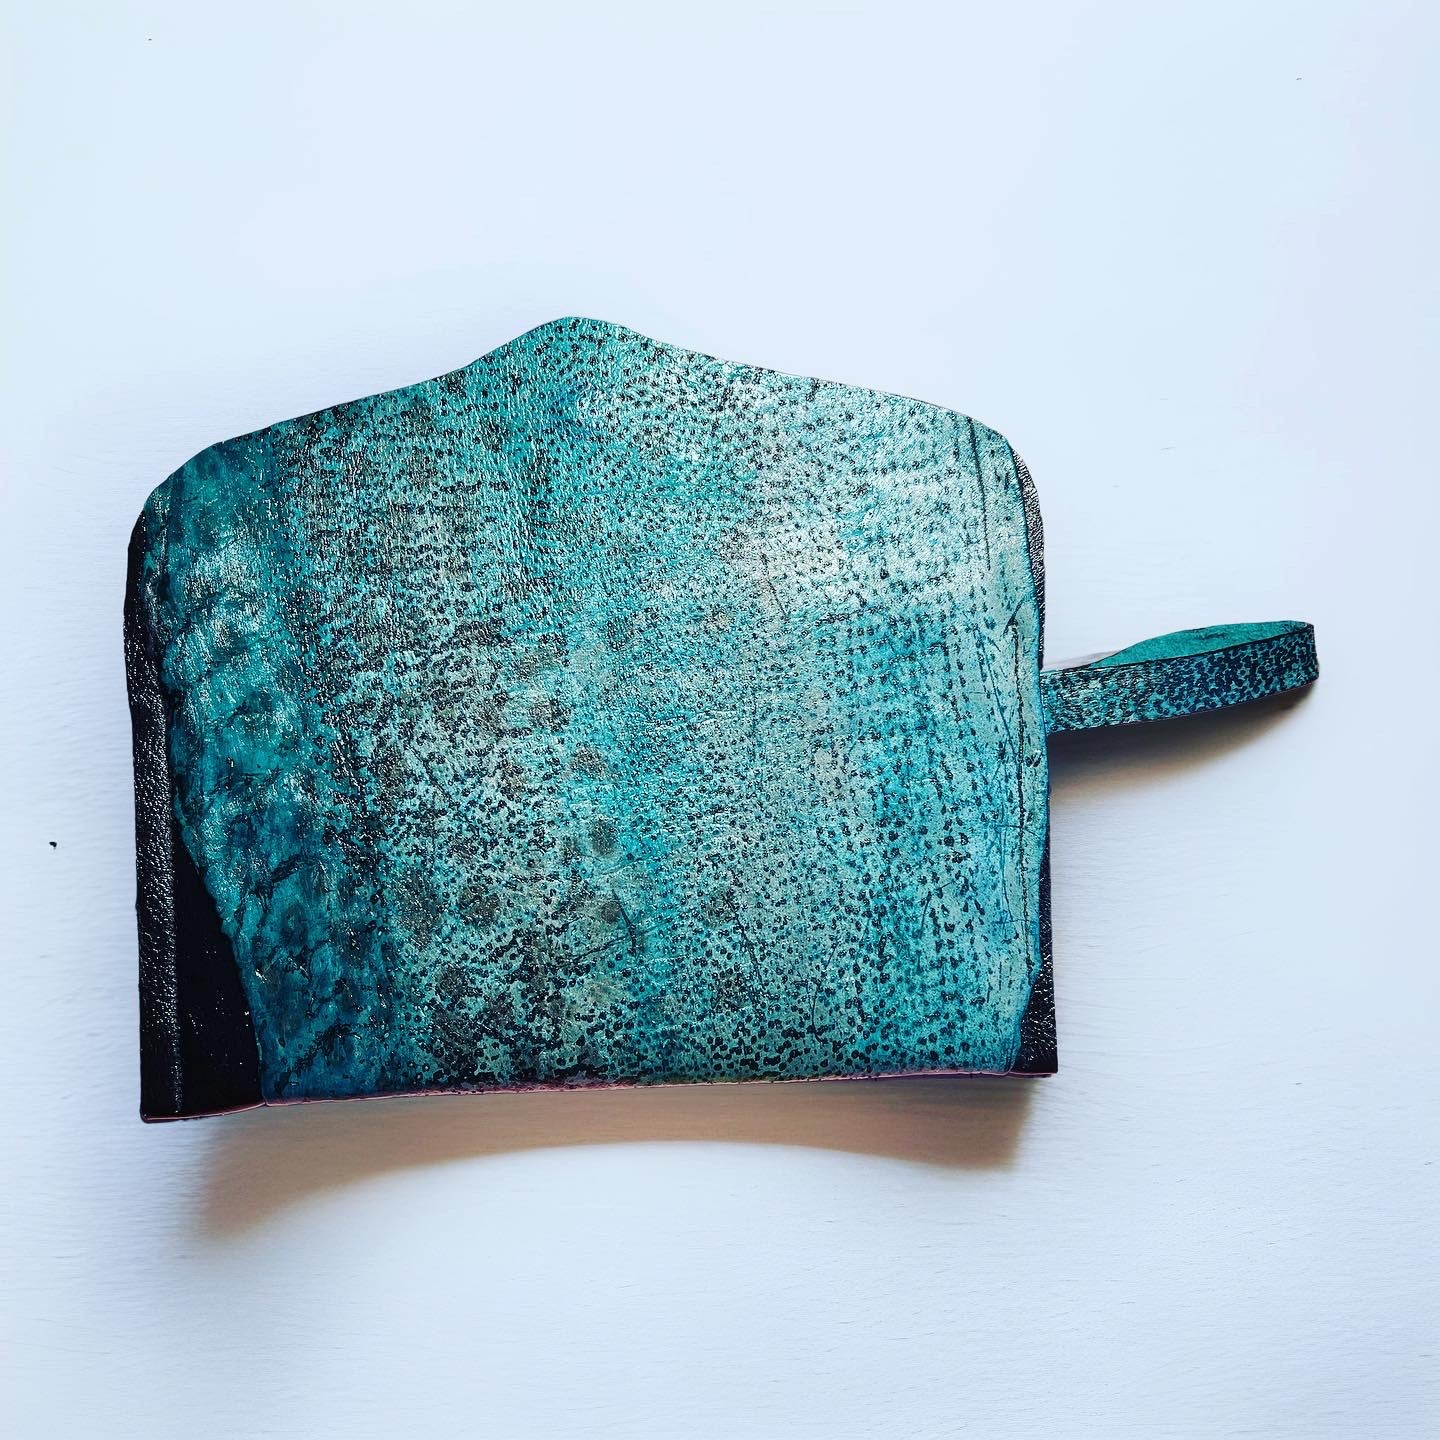 Teal Fish Skin Leather & Seal Leather w/strap